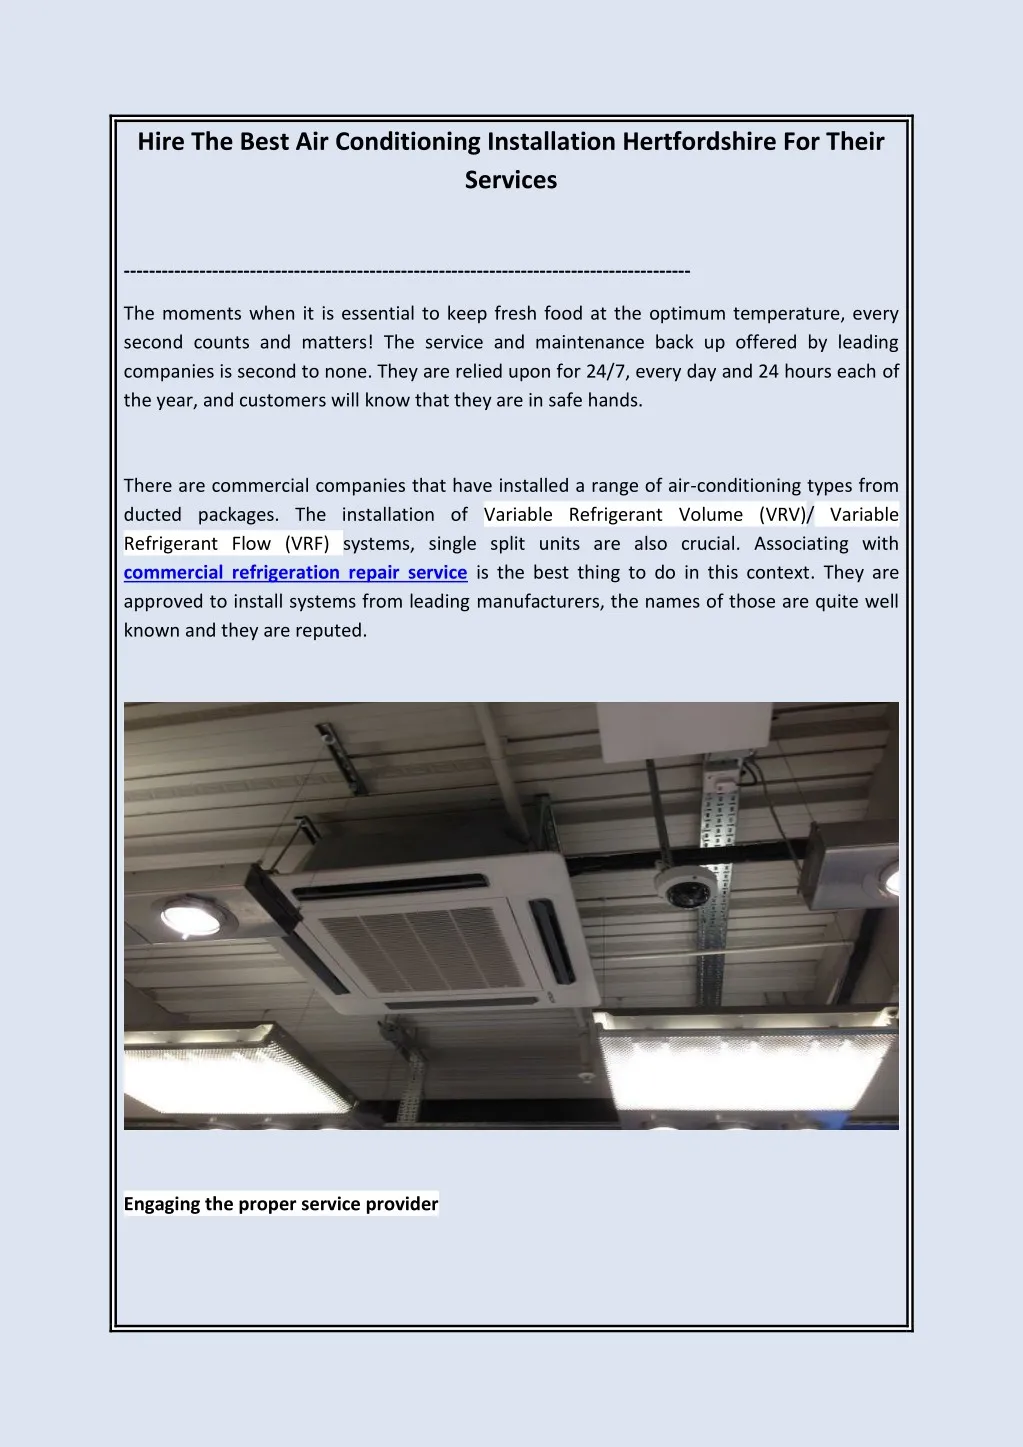 hire the best air conditioning installation